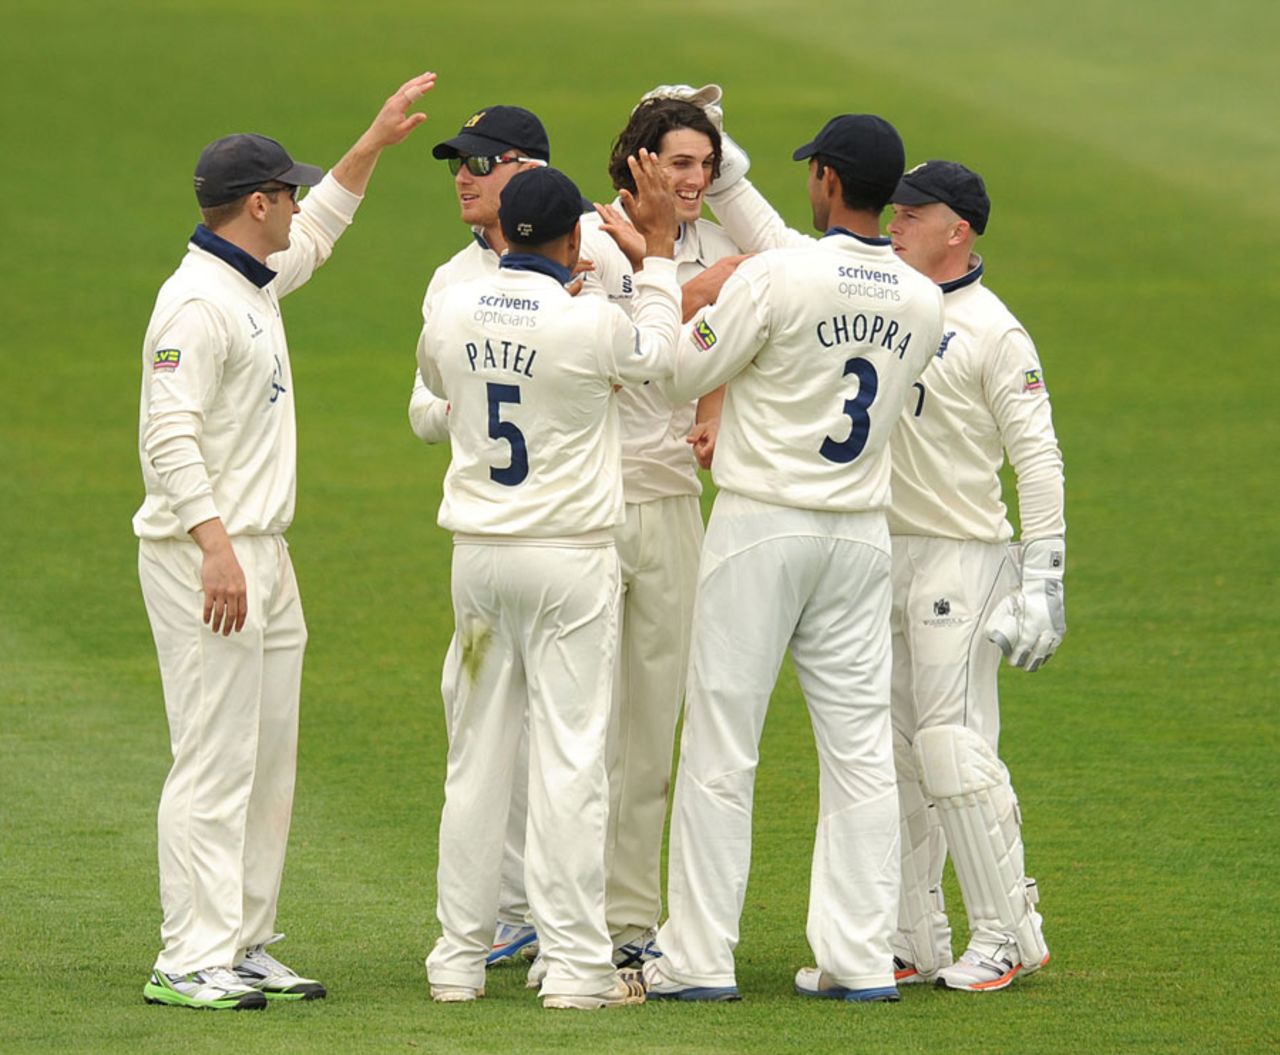 Chris Wright is congratulated on taking a wicket, Somerset v Warwickshire, County Championship, Division One, Taunton, 1st day, April 25, 2013